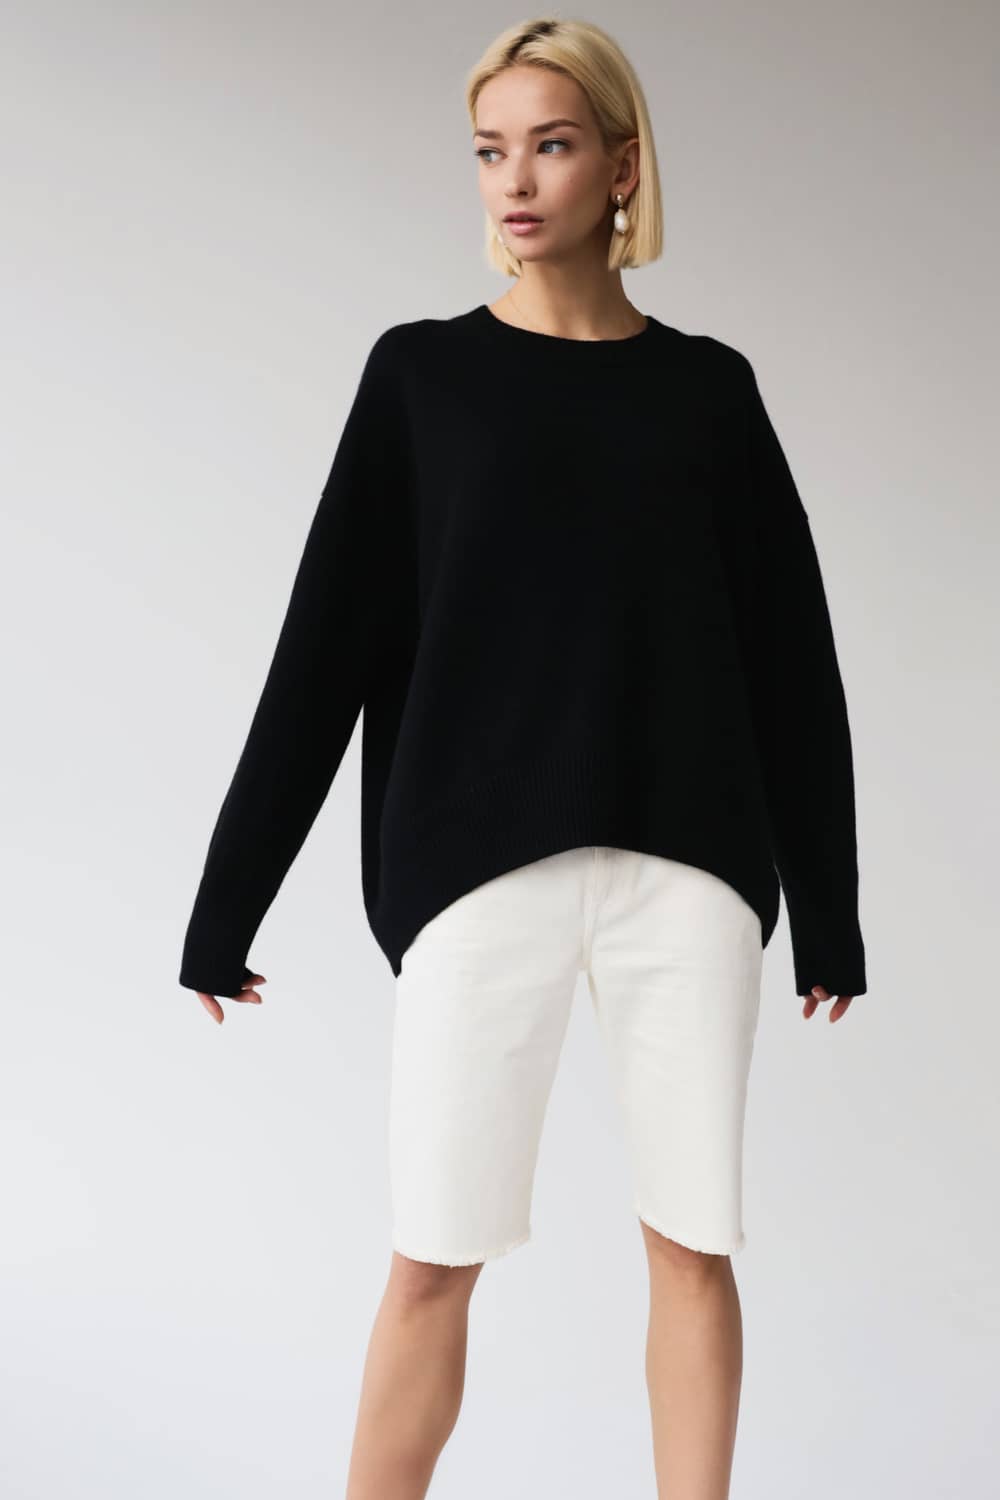 Women's solid color sweater